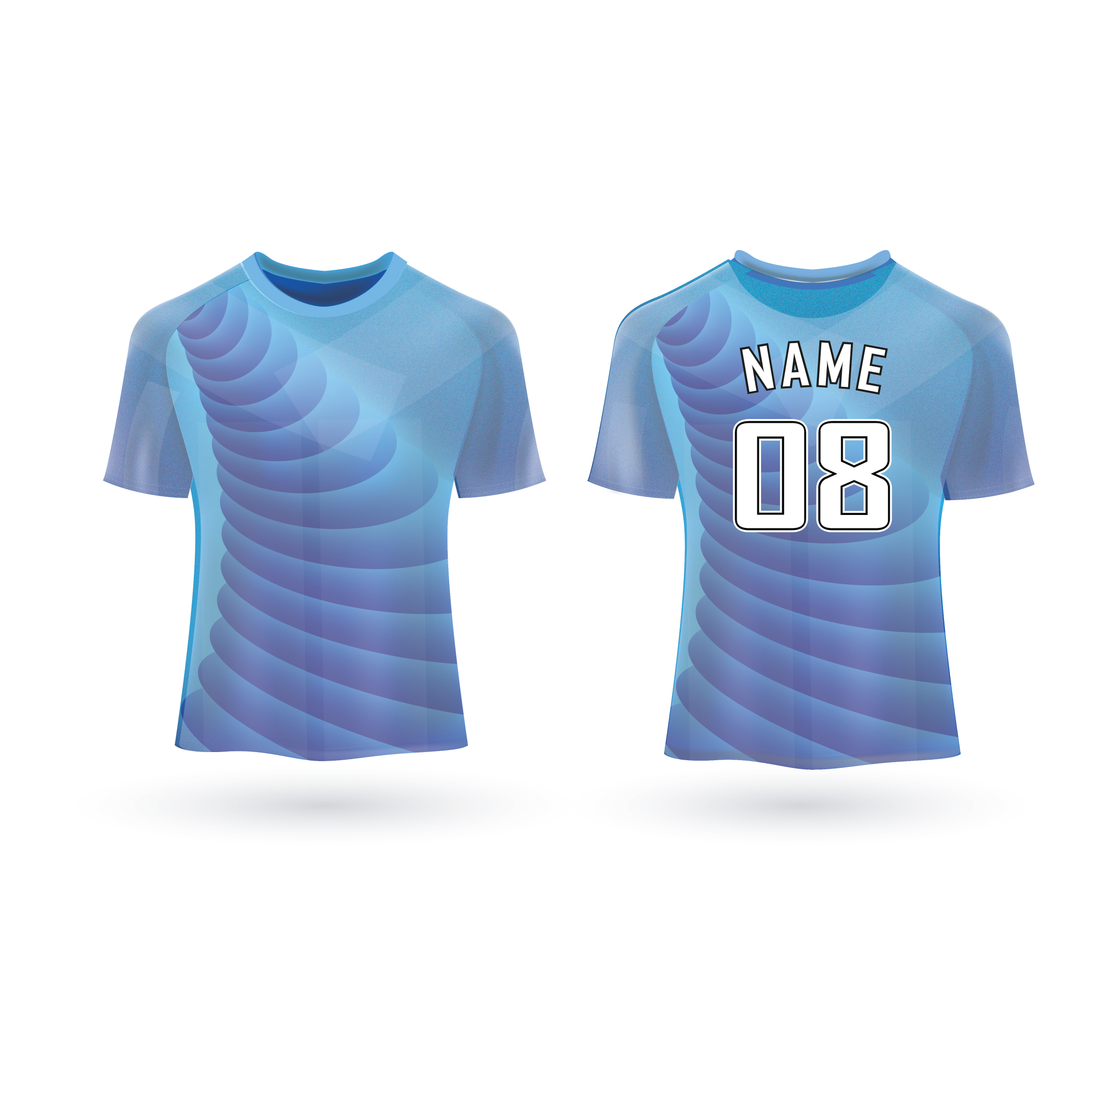 NEXT PRINT All Over Printed Customized Sublimation T-Shirt Unisex Sports Jersey Player Name & Number, Team Name NP50000278